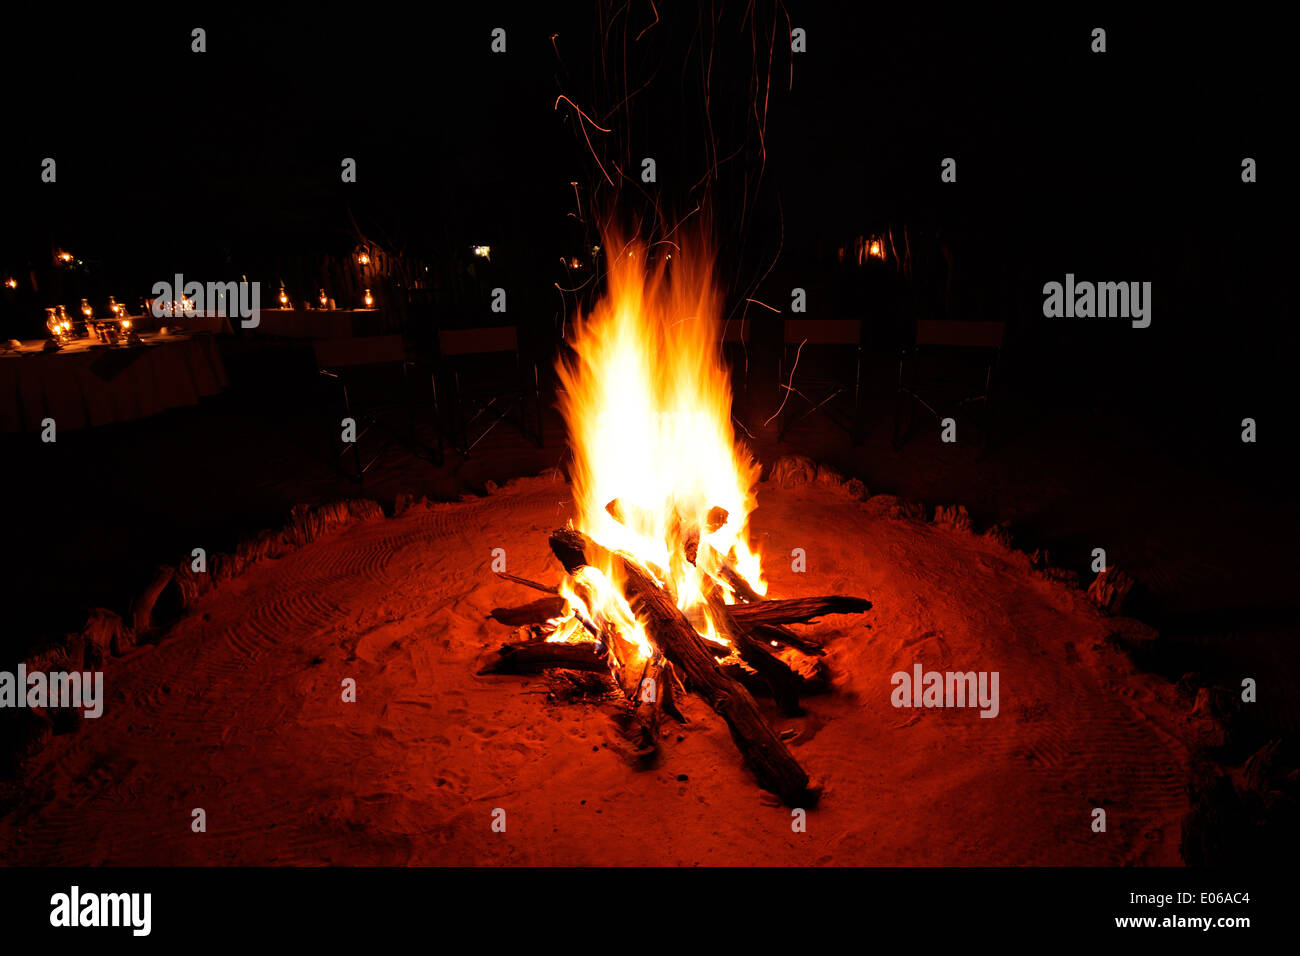 Outdoor wood campfire burning brightly during the darkness of nighttime Stock Photo